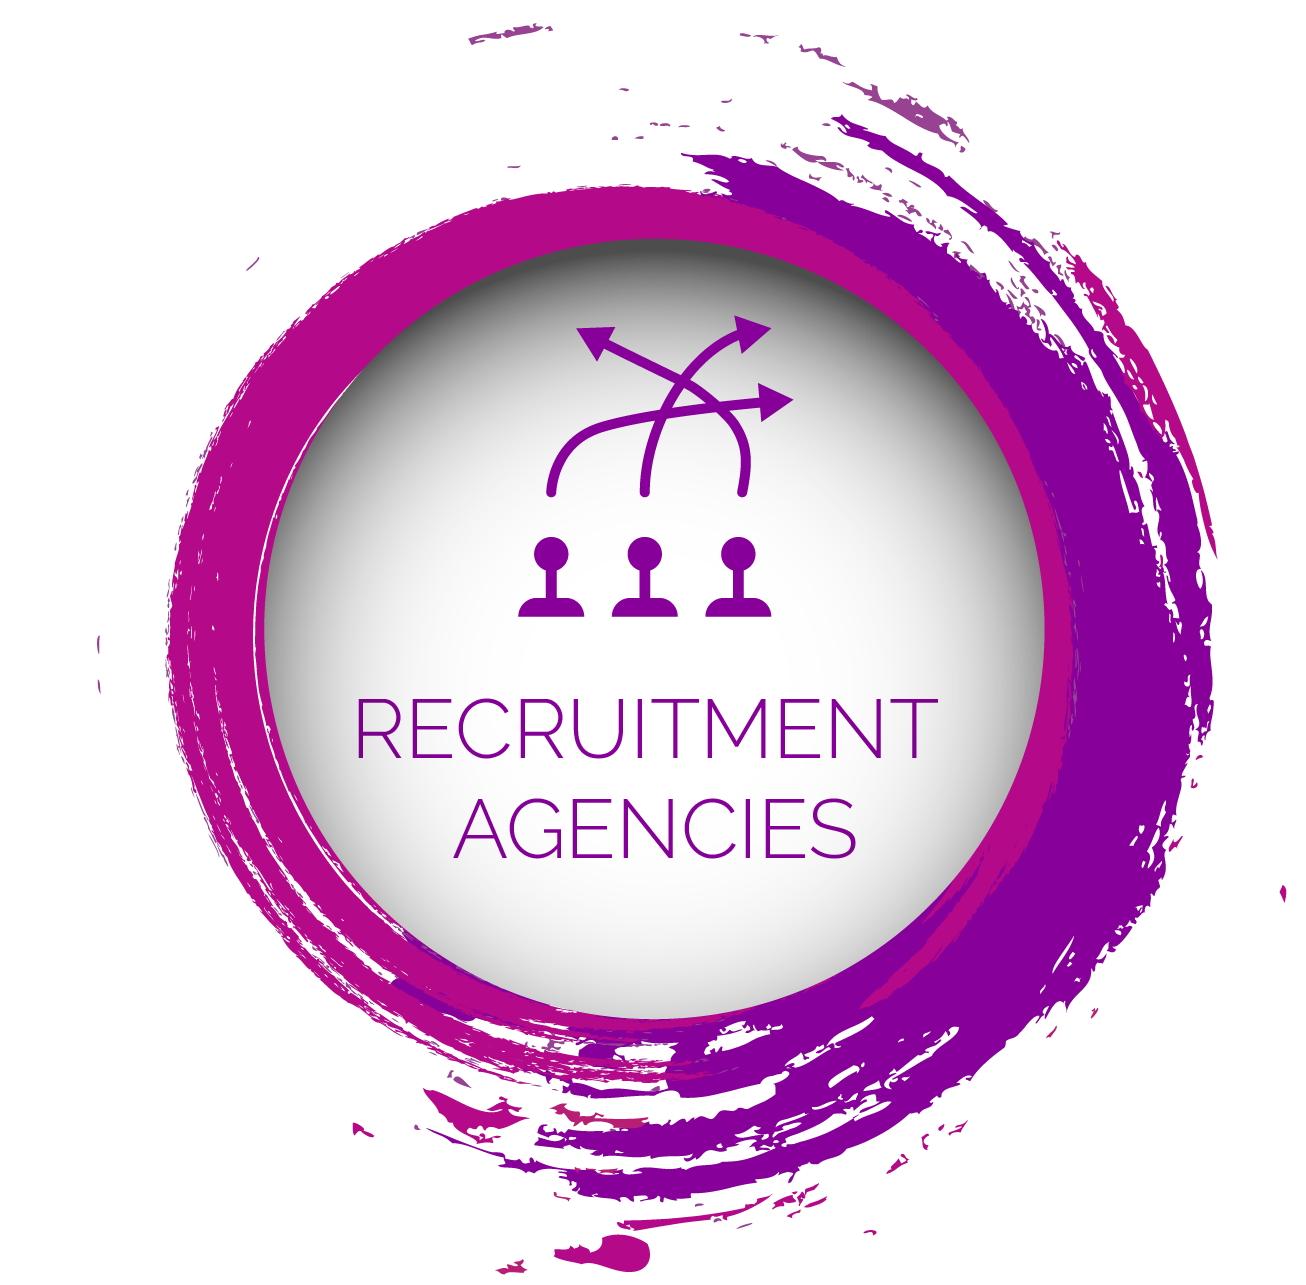 Ecom Digital Specialist Marketing For The Recruitment Industry